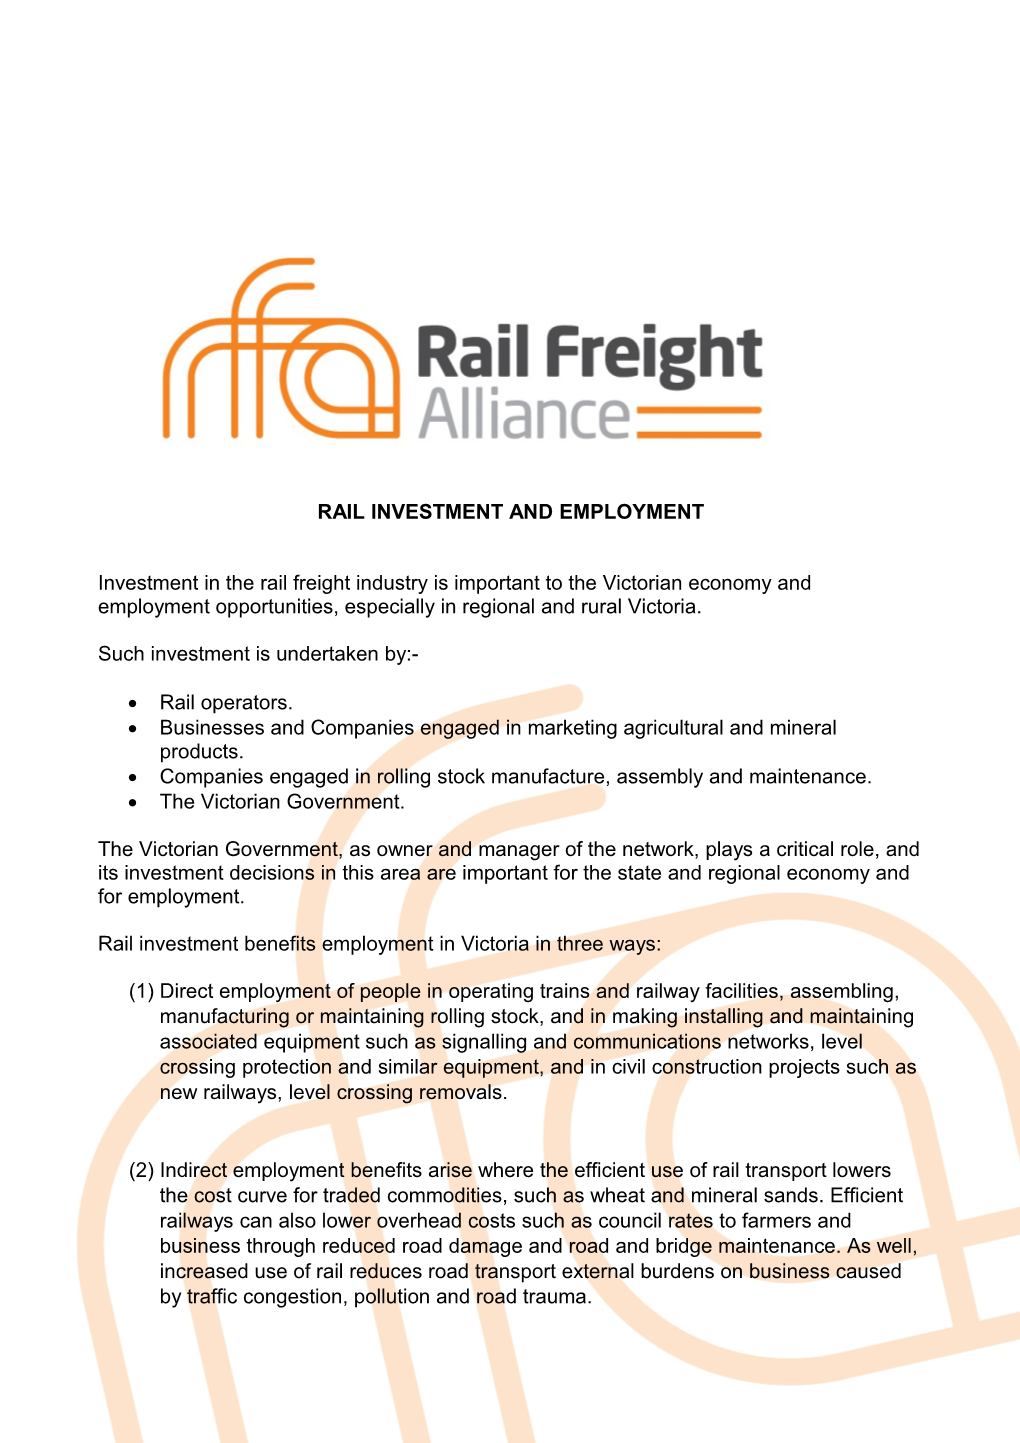 Rail Investment and Employment